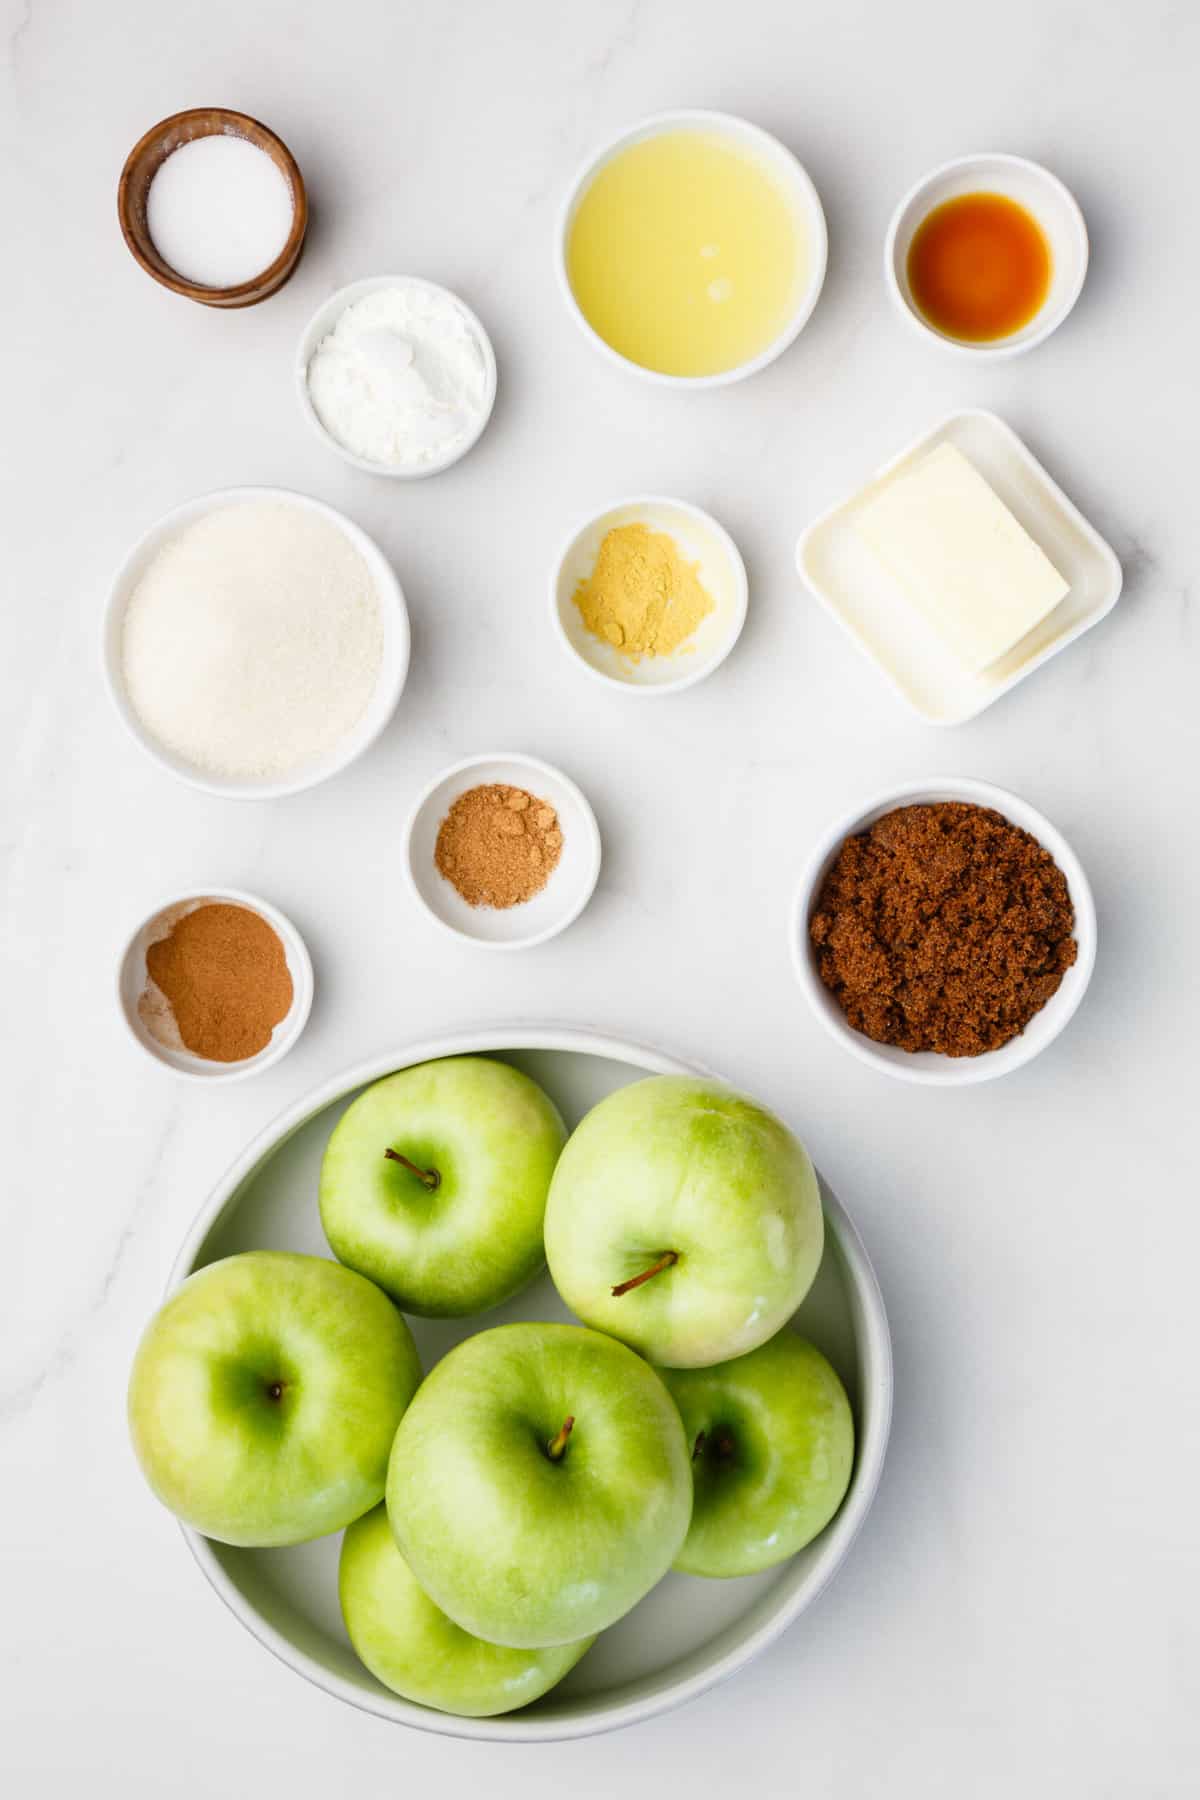 The ingredients to make apple pie filling are shown portioned out on a white background: green apples, brown sugar, butter, lemon juice, cornstarch, vanilla extract, and ground spices.